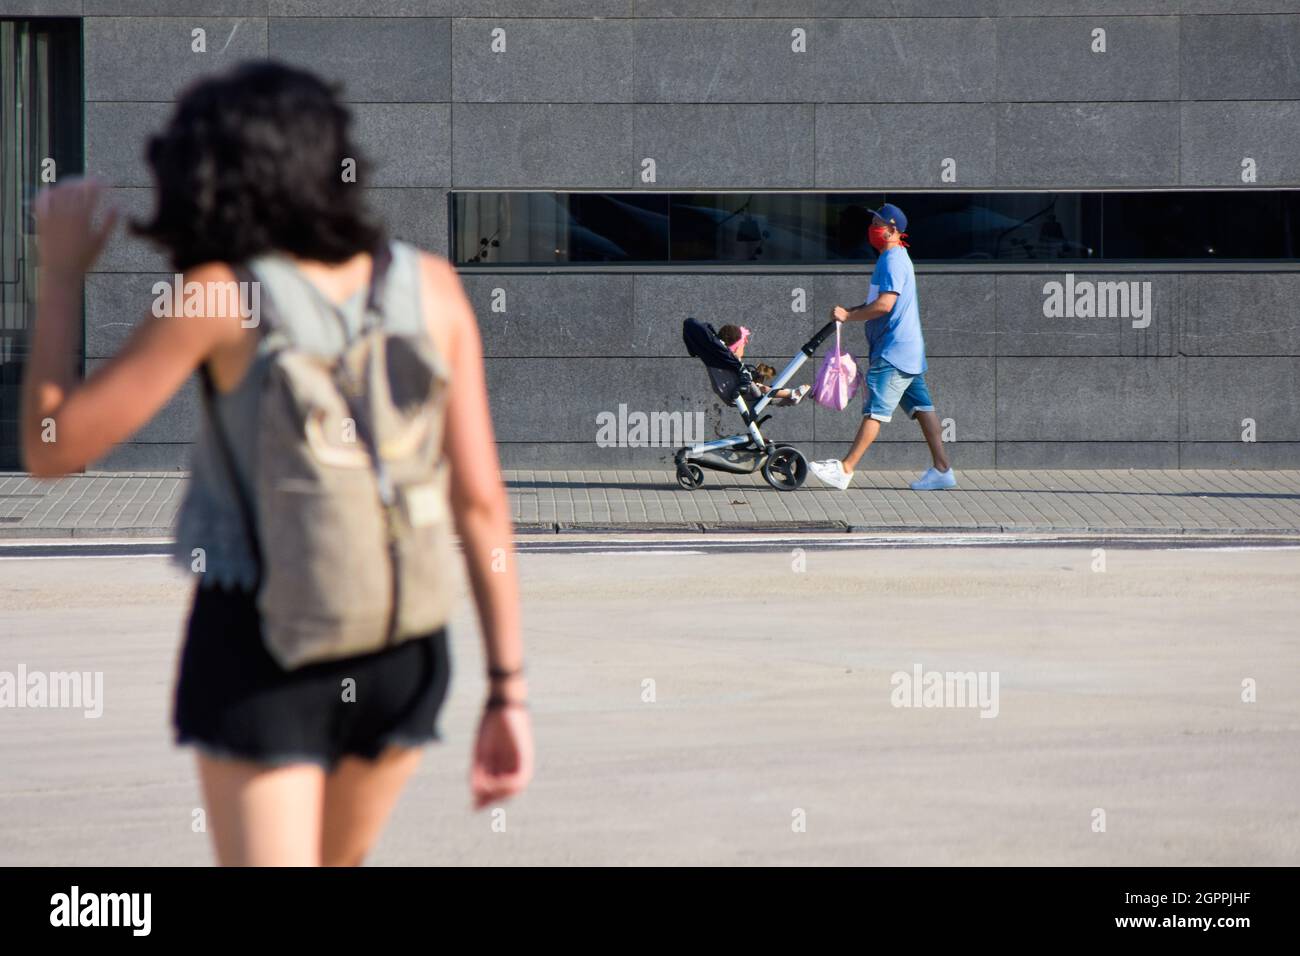 Father with mask pushing his baby in stroller in a street near a wall. Stock Photo